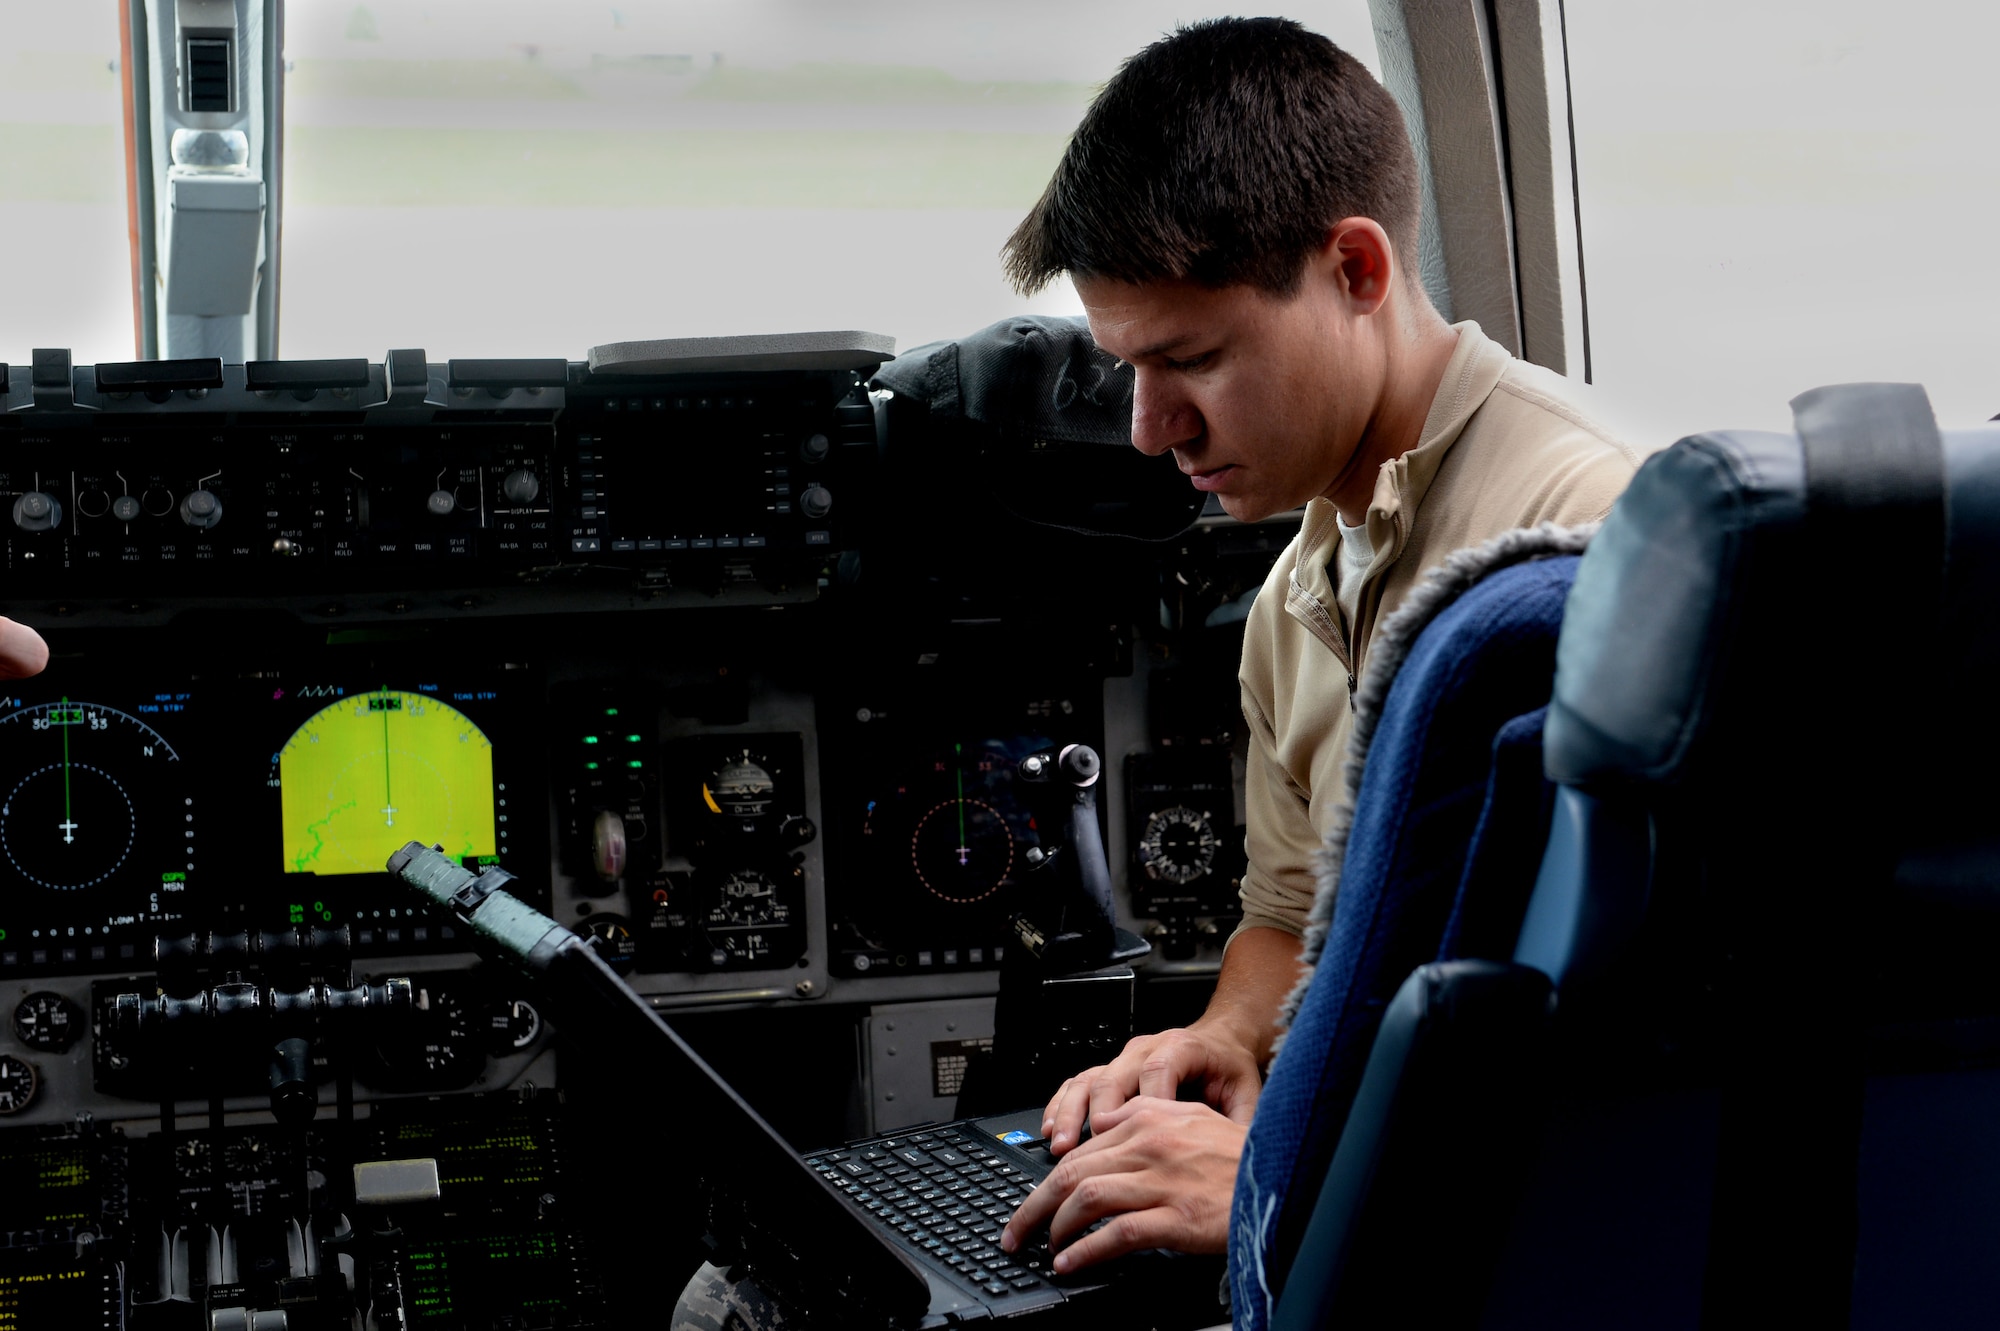 U.S. Air Force Senior Airman Nicholas Matta, 726th Air Mobility Squadron communications and navigation specialist from Hartsdale, Tenn., troubleshoots avionics systems in a U.S. Air Force C-17 Globemaster III Cargo Aircraft system at Spangdahlem Air Base, Germany, May 7, 2014. Upon recovering an aircraft, Airmen from the 726th coordinate with flight crew to prepare for its next departure. (U.S. Air Force photo by Senior Airman Alexis Siekert/Released)